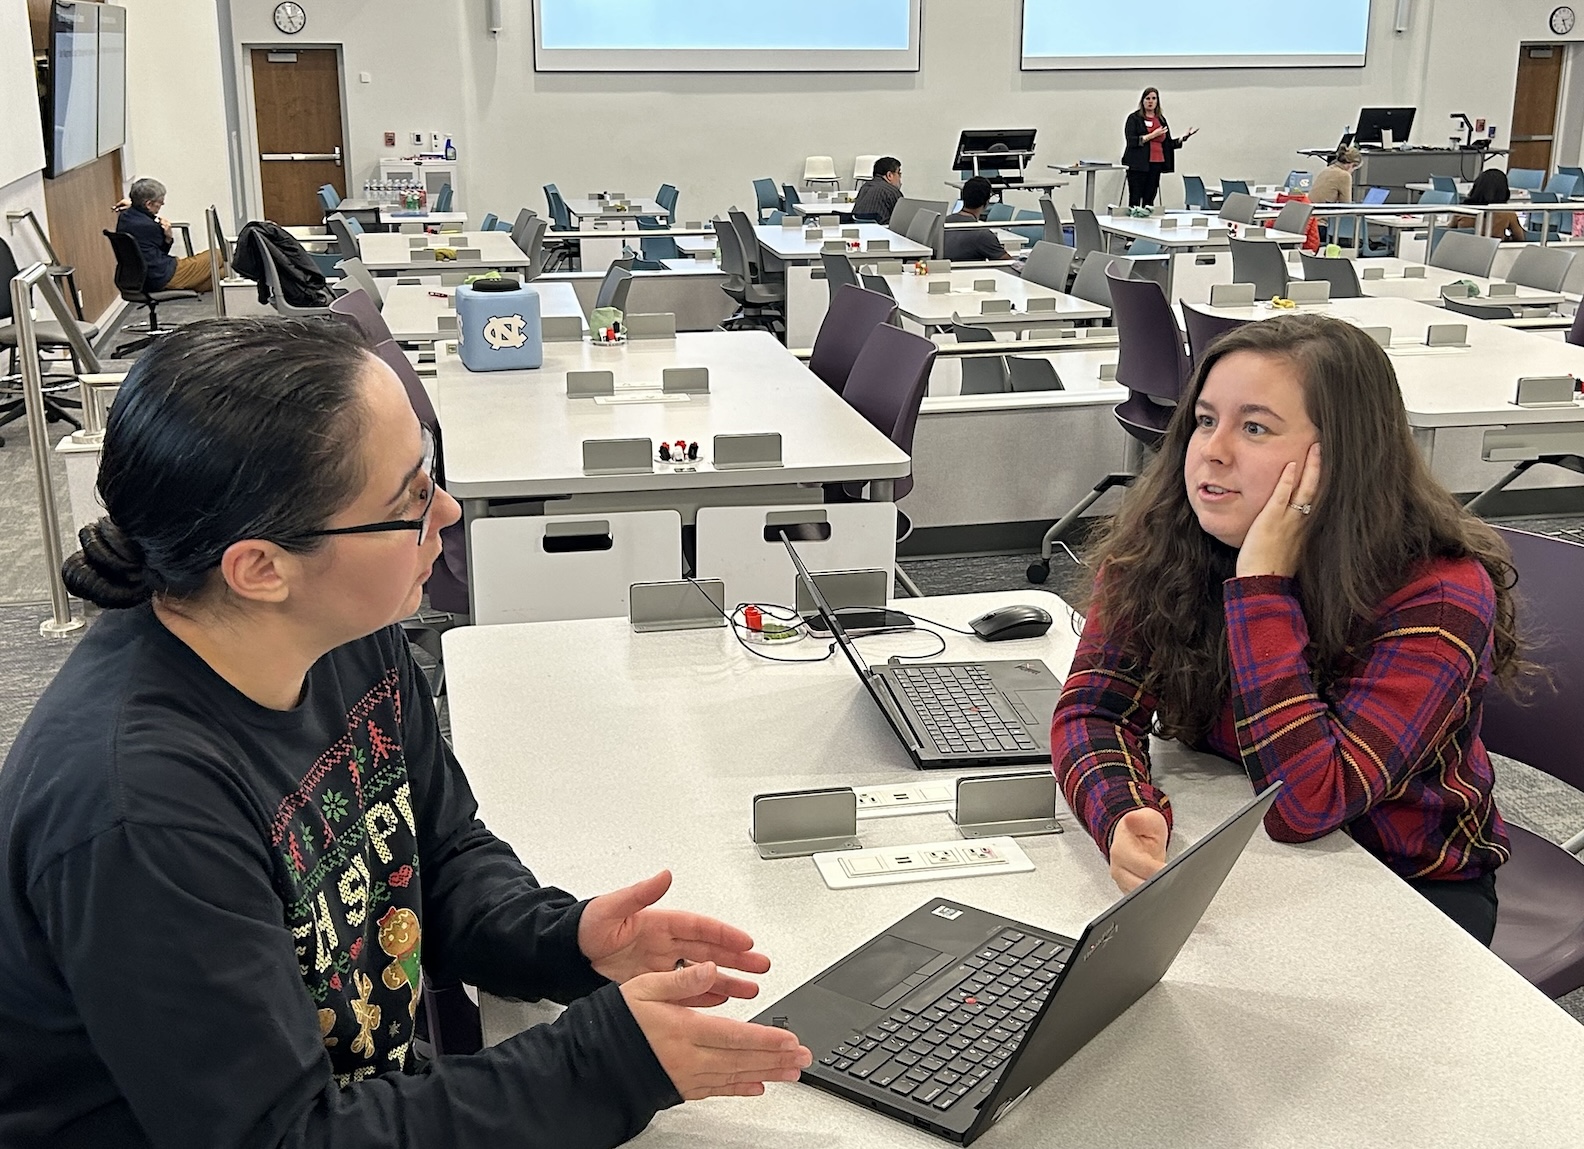 Two ITS Educational Technologies staffers talk while a Center for Faculty Excellence representative trains faculty members in the front of a classroom.